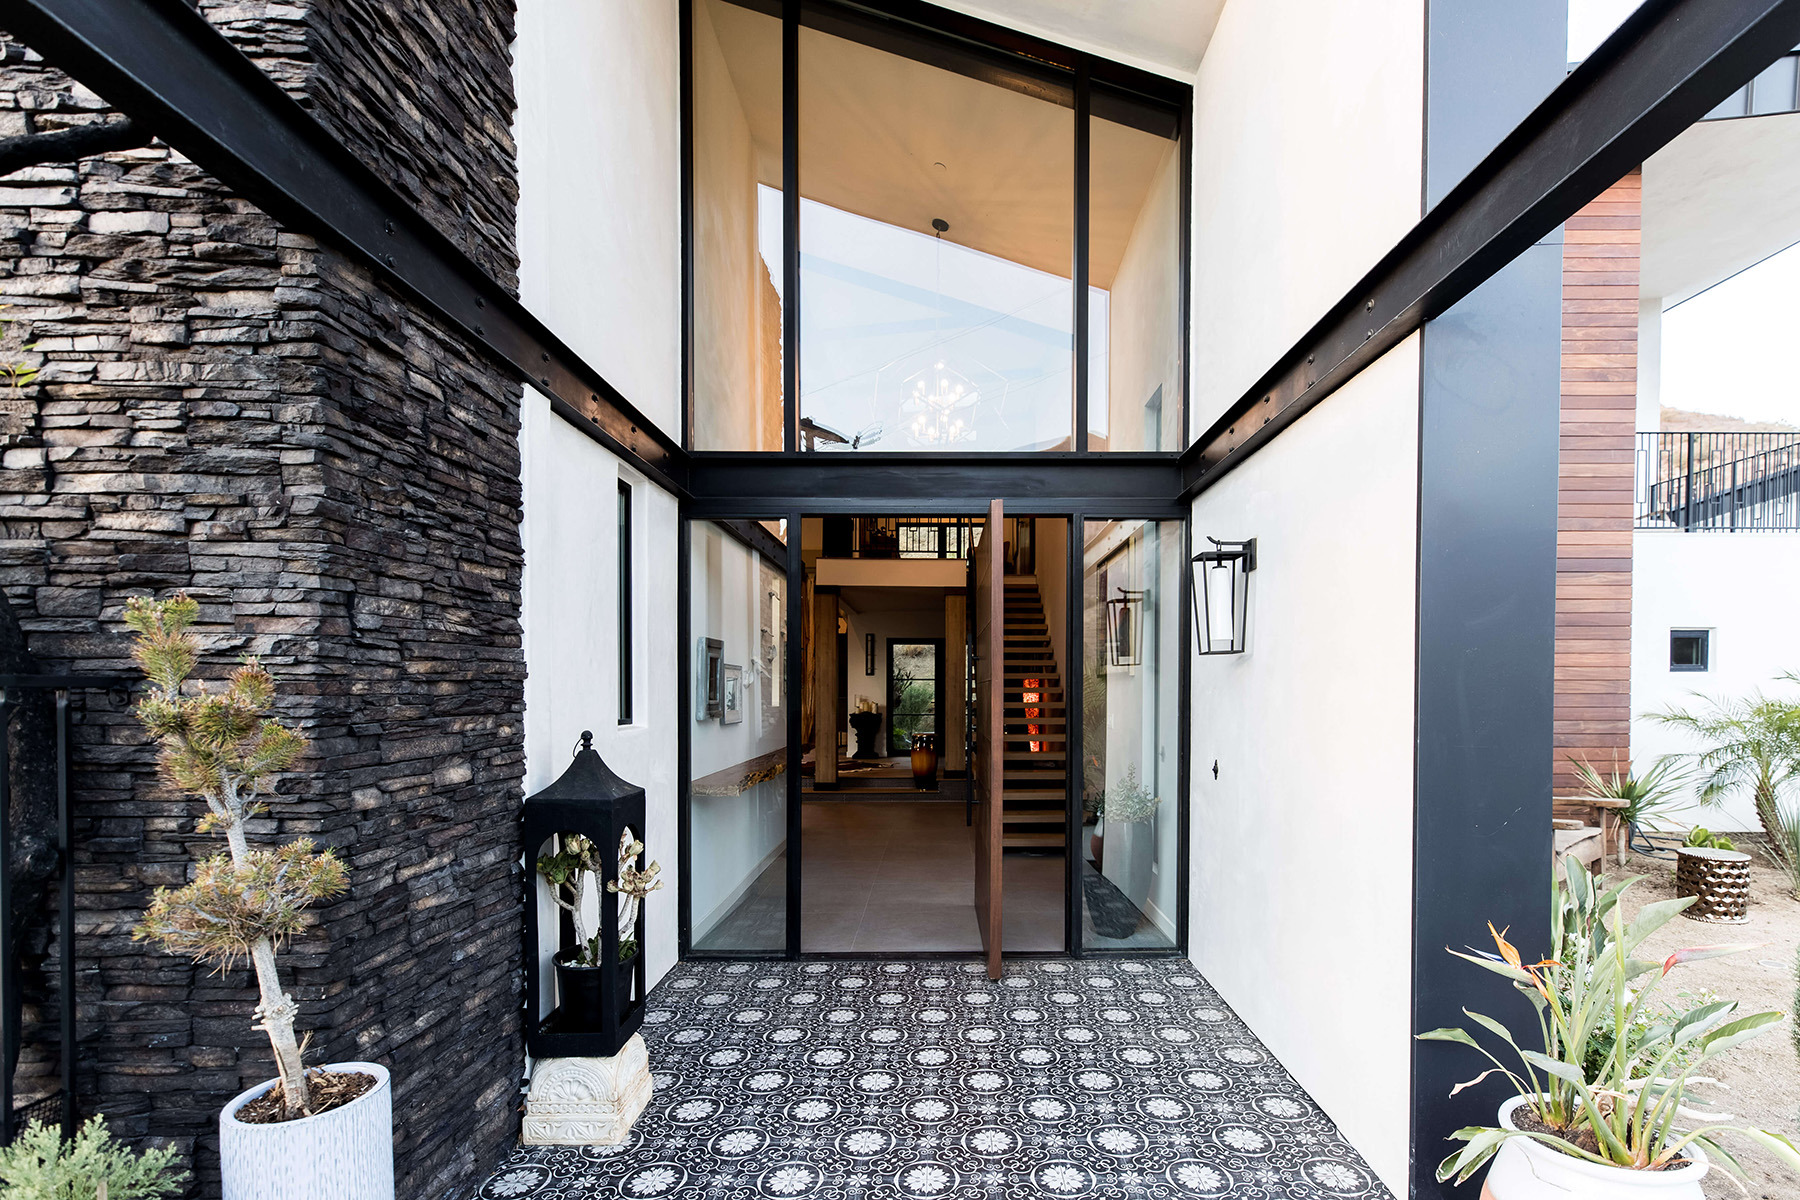 Entryway area to a modern home with the door open